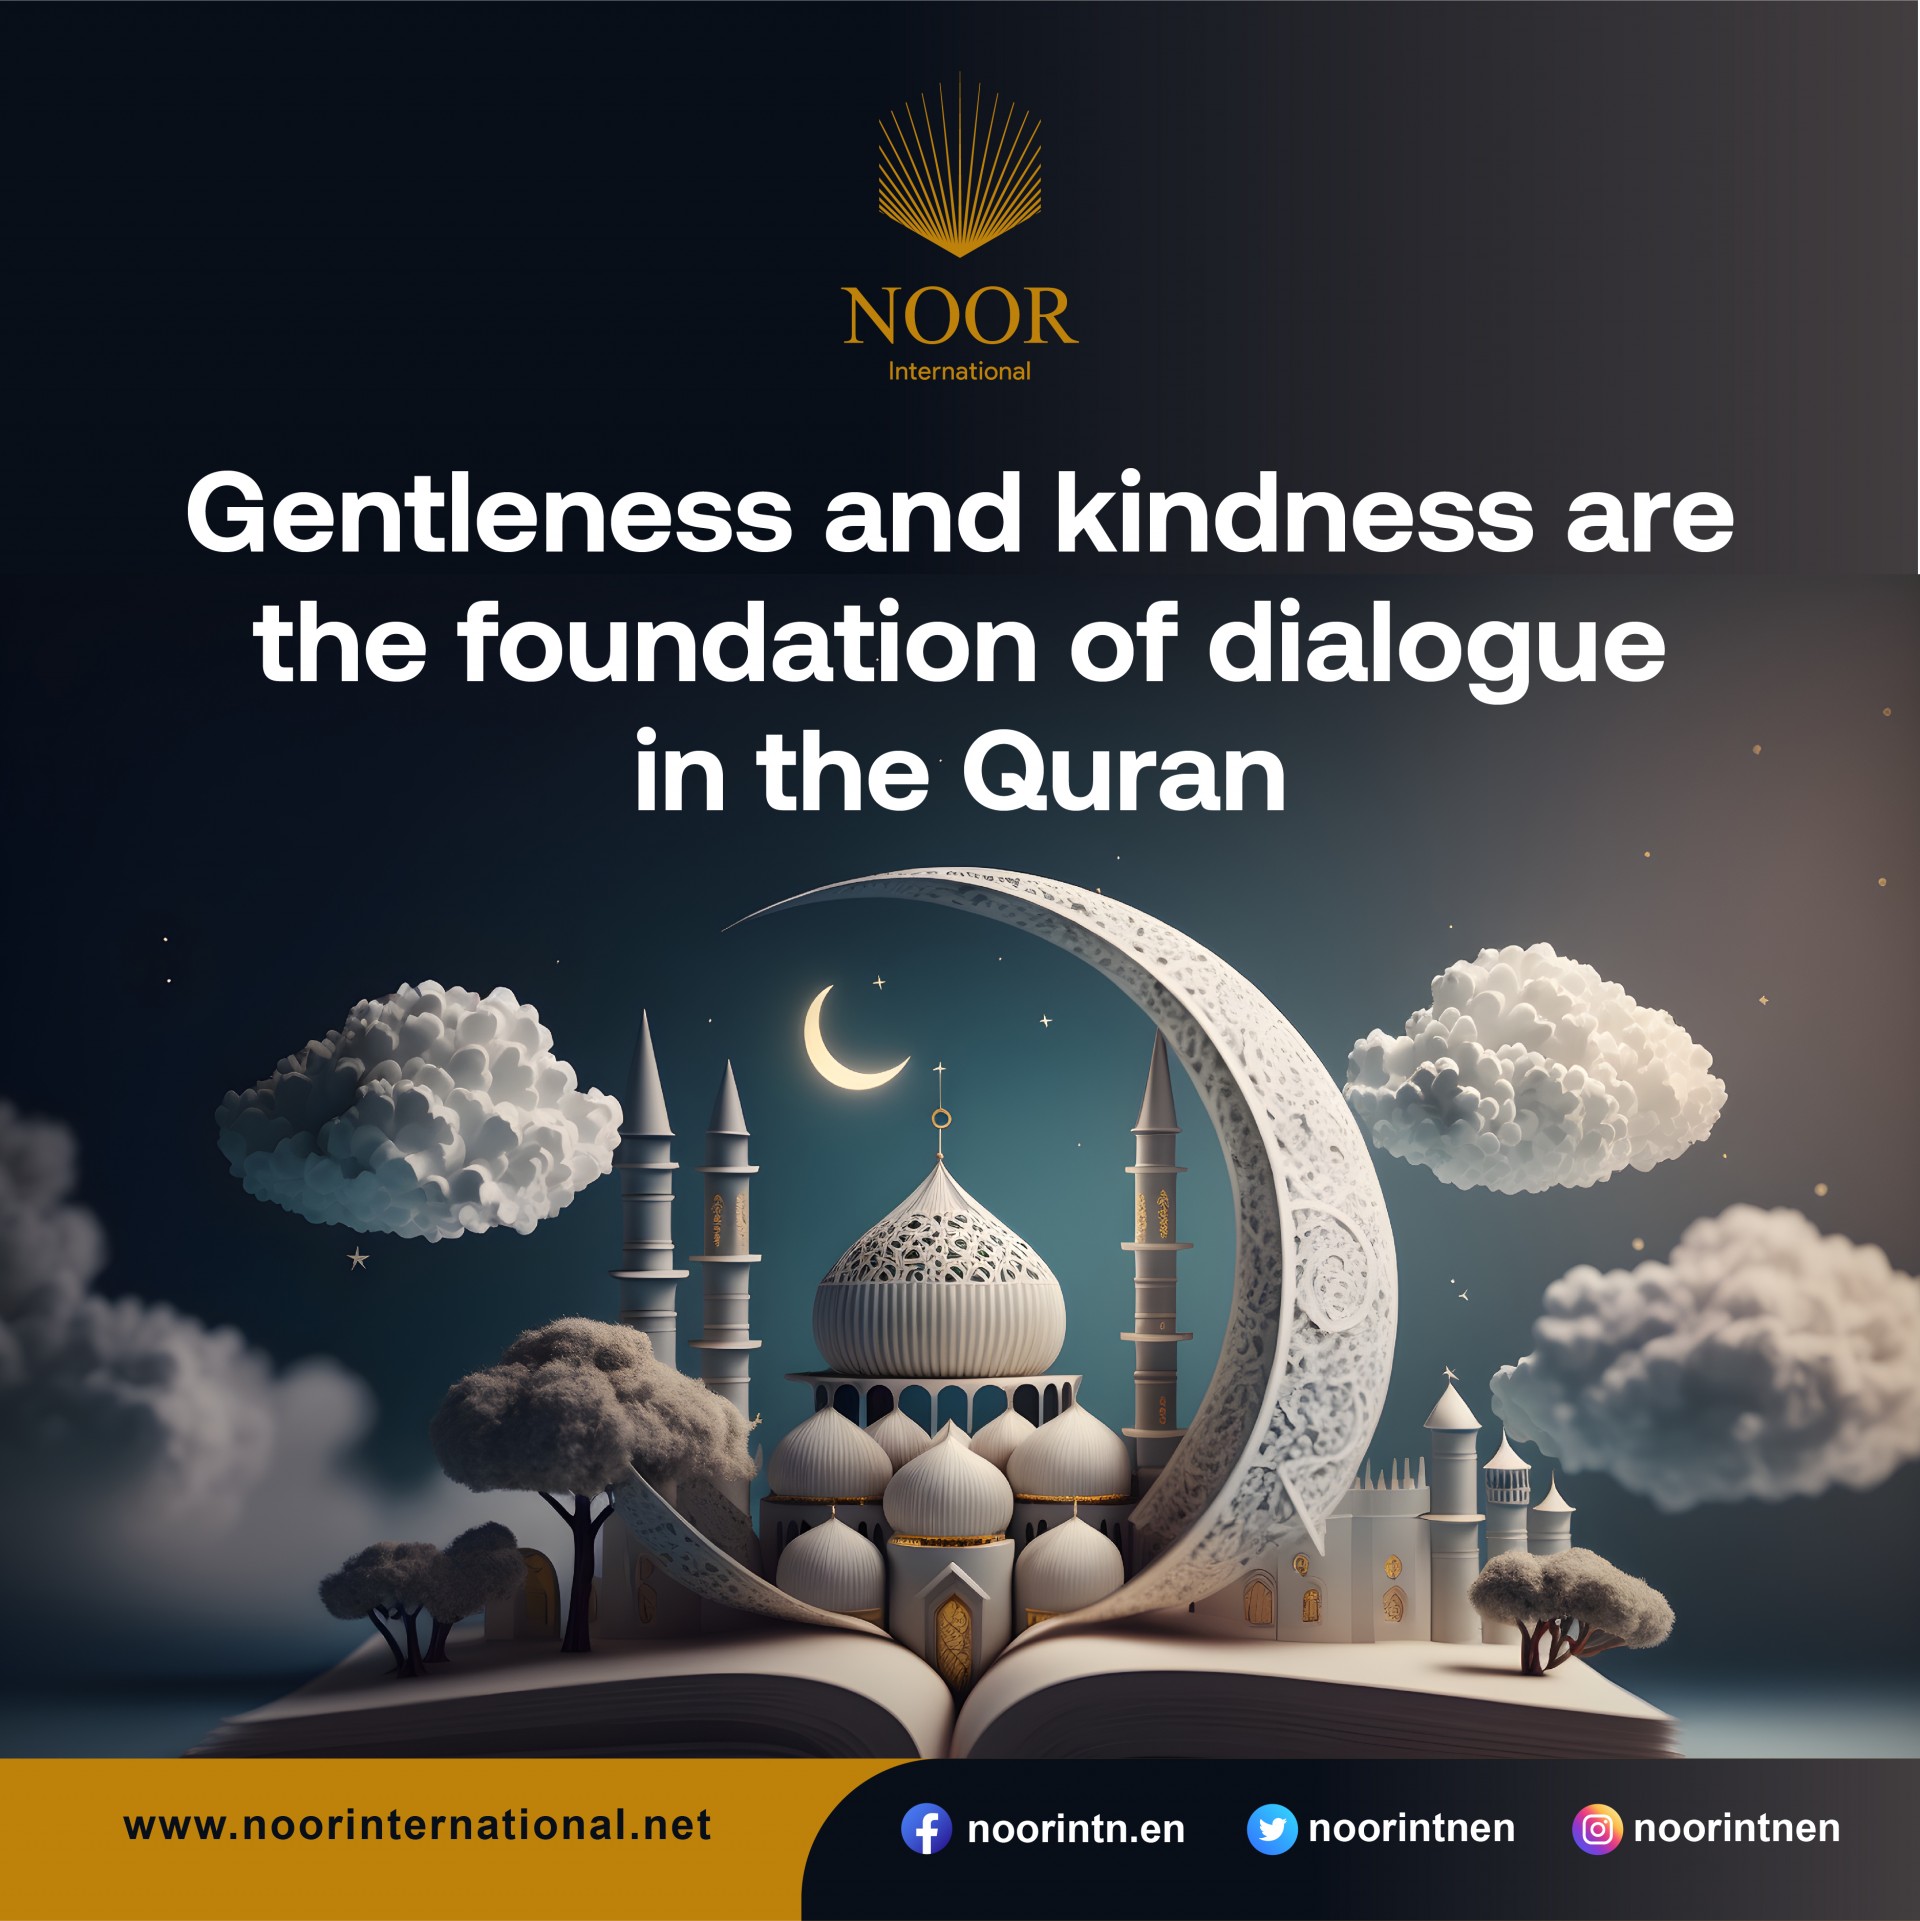 Gentleness and kindness are the foundation of dialogue in the Quran